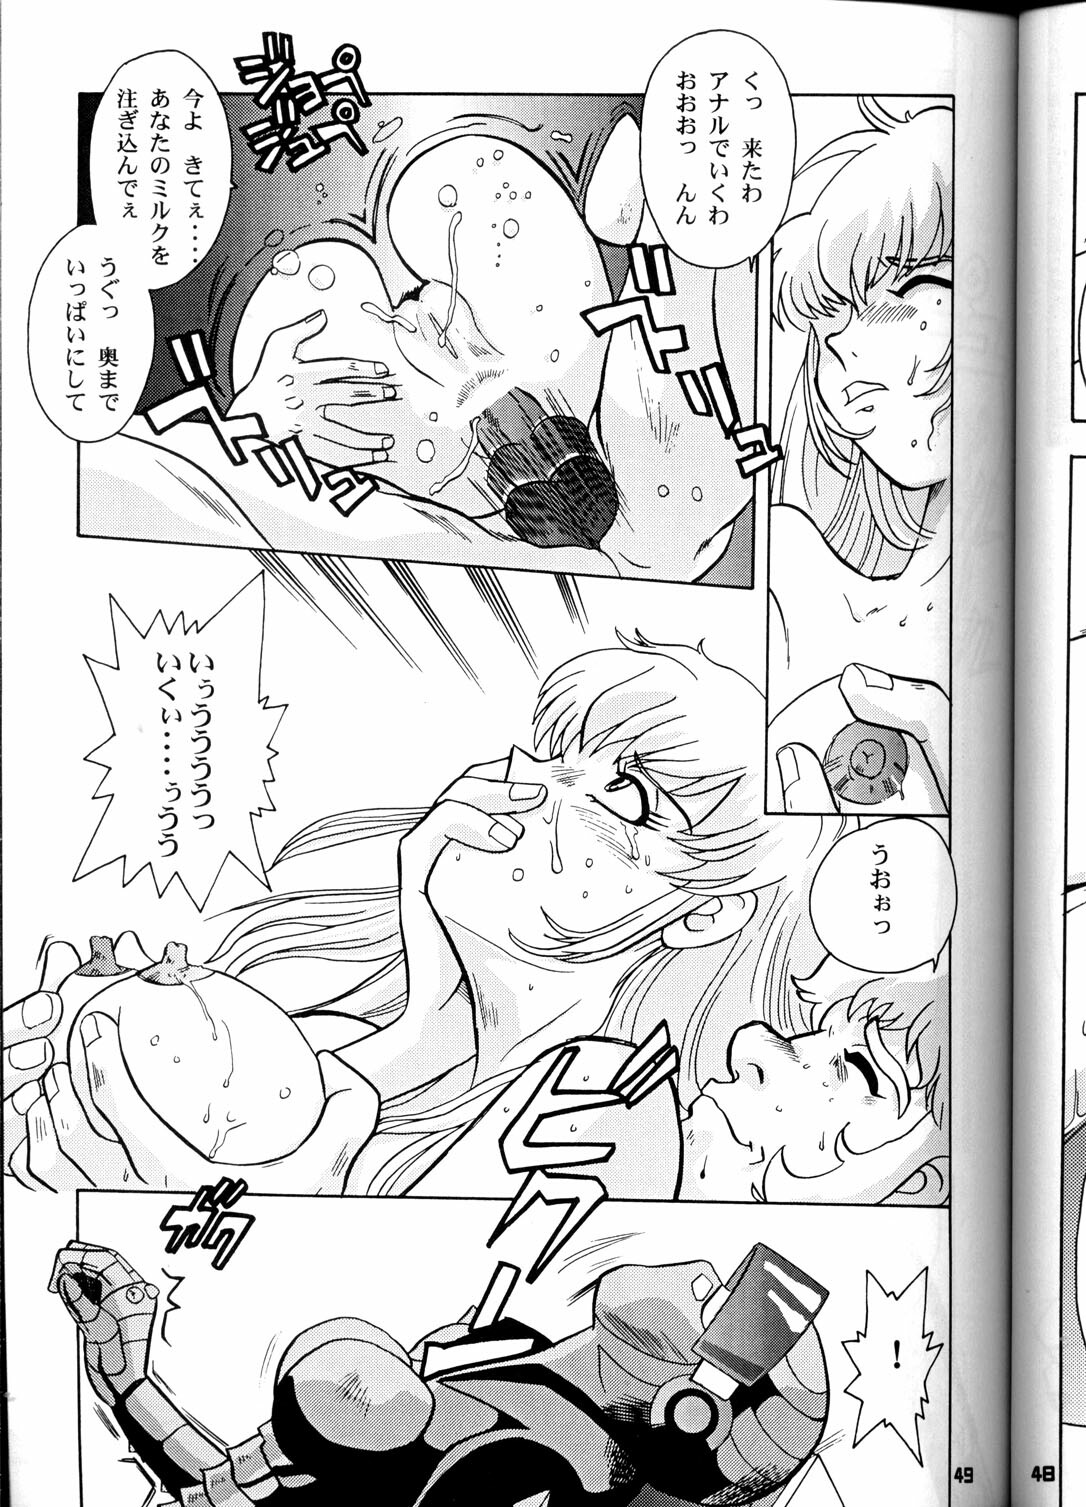 (C58) [T2 UNIT (Various)] OH! Robo Musume Chuushuugou! (Various) page 49 full